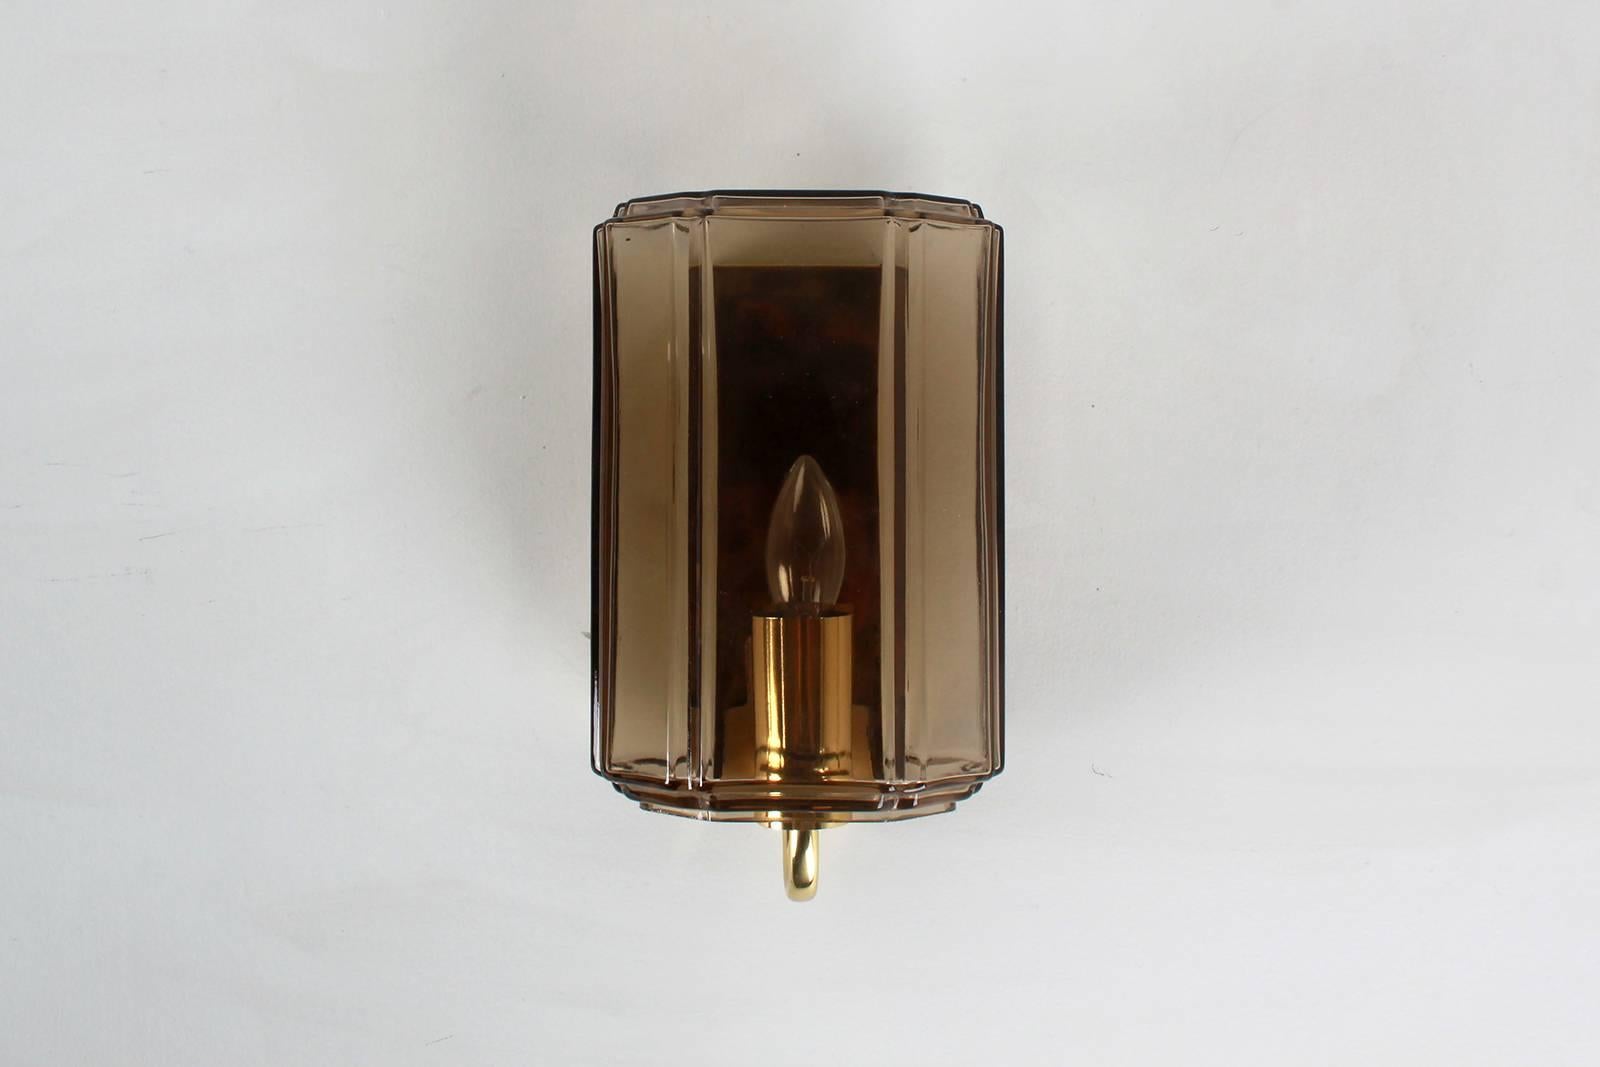 Beautiful Austrian sconces with topaz colored smoked brown glass in a cylindrical geometric shape. Brass hardware and newly rewired. Three available and sold individually.